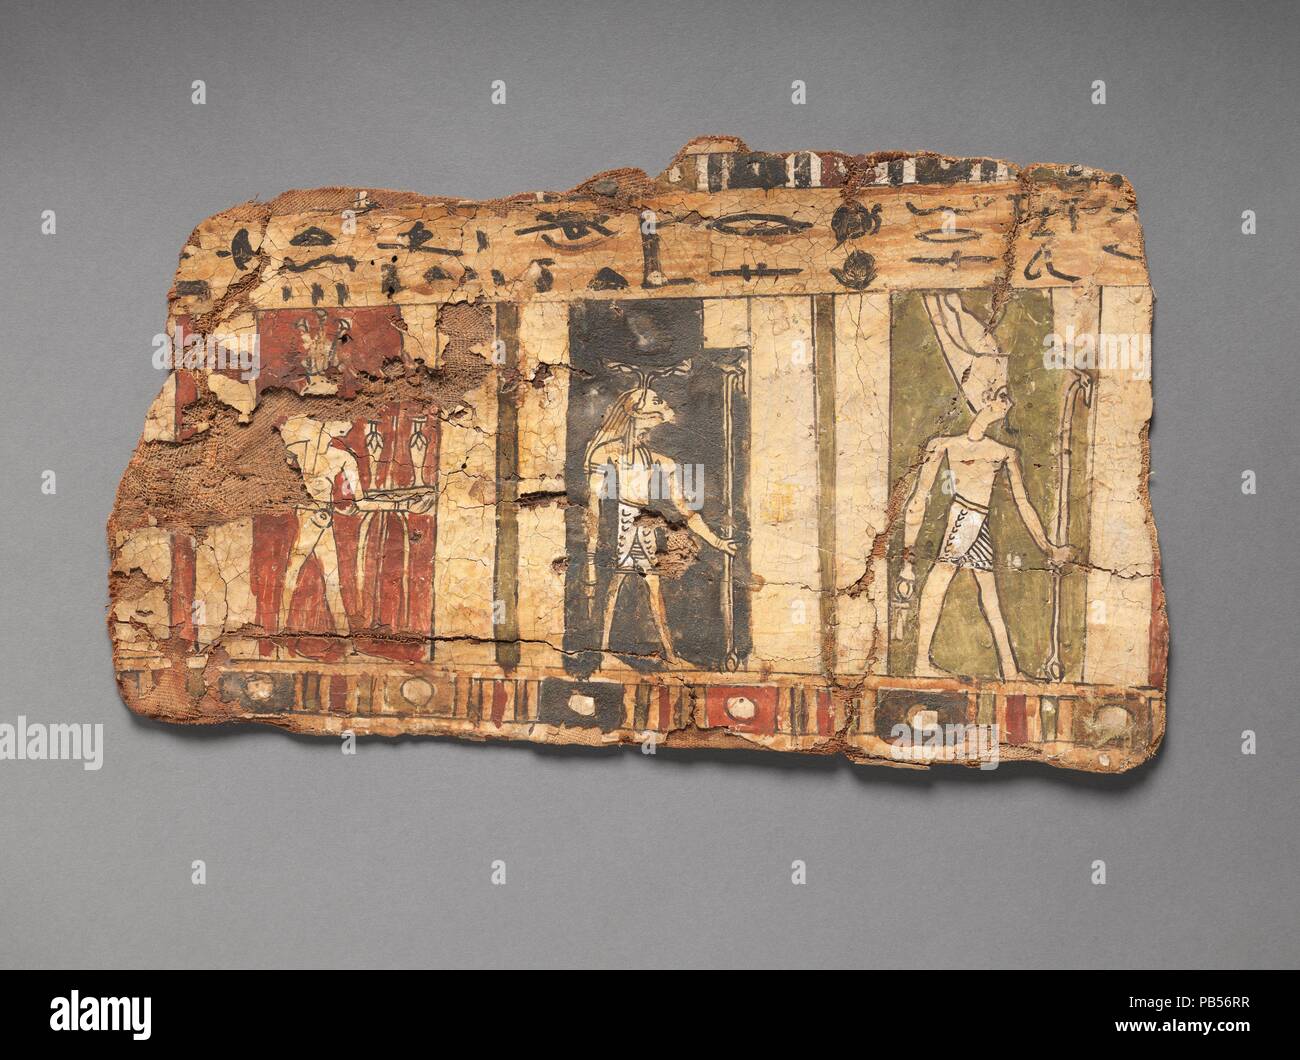 Fragment of cartonnage depicting three deities. Dimensions: H. 20.5 cm (8 1/16 in.); L. 34.4 cm (13 9/16 in.). Date: 200 BC-200 AD.  Designed to encase a mummy, this cartonnage is composed of about seven layers of linen plastered together to form a hard shell. Visible on this fragment are three gods: at the right is the creator god Atum in the double crown; followed by the ram-headed god Khnum; and then Hapy, personification of the fertility brought by the Nile River. An inscription in roughly-sketched hieroglyphs runs from right to left in the band above their heads. The somewhat awkward styl Stock Photo